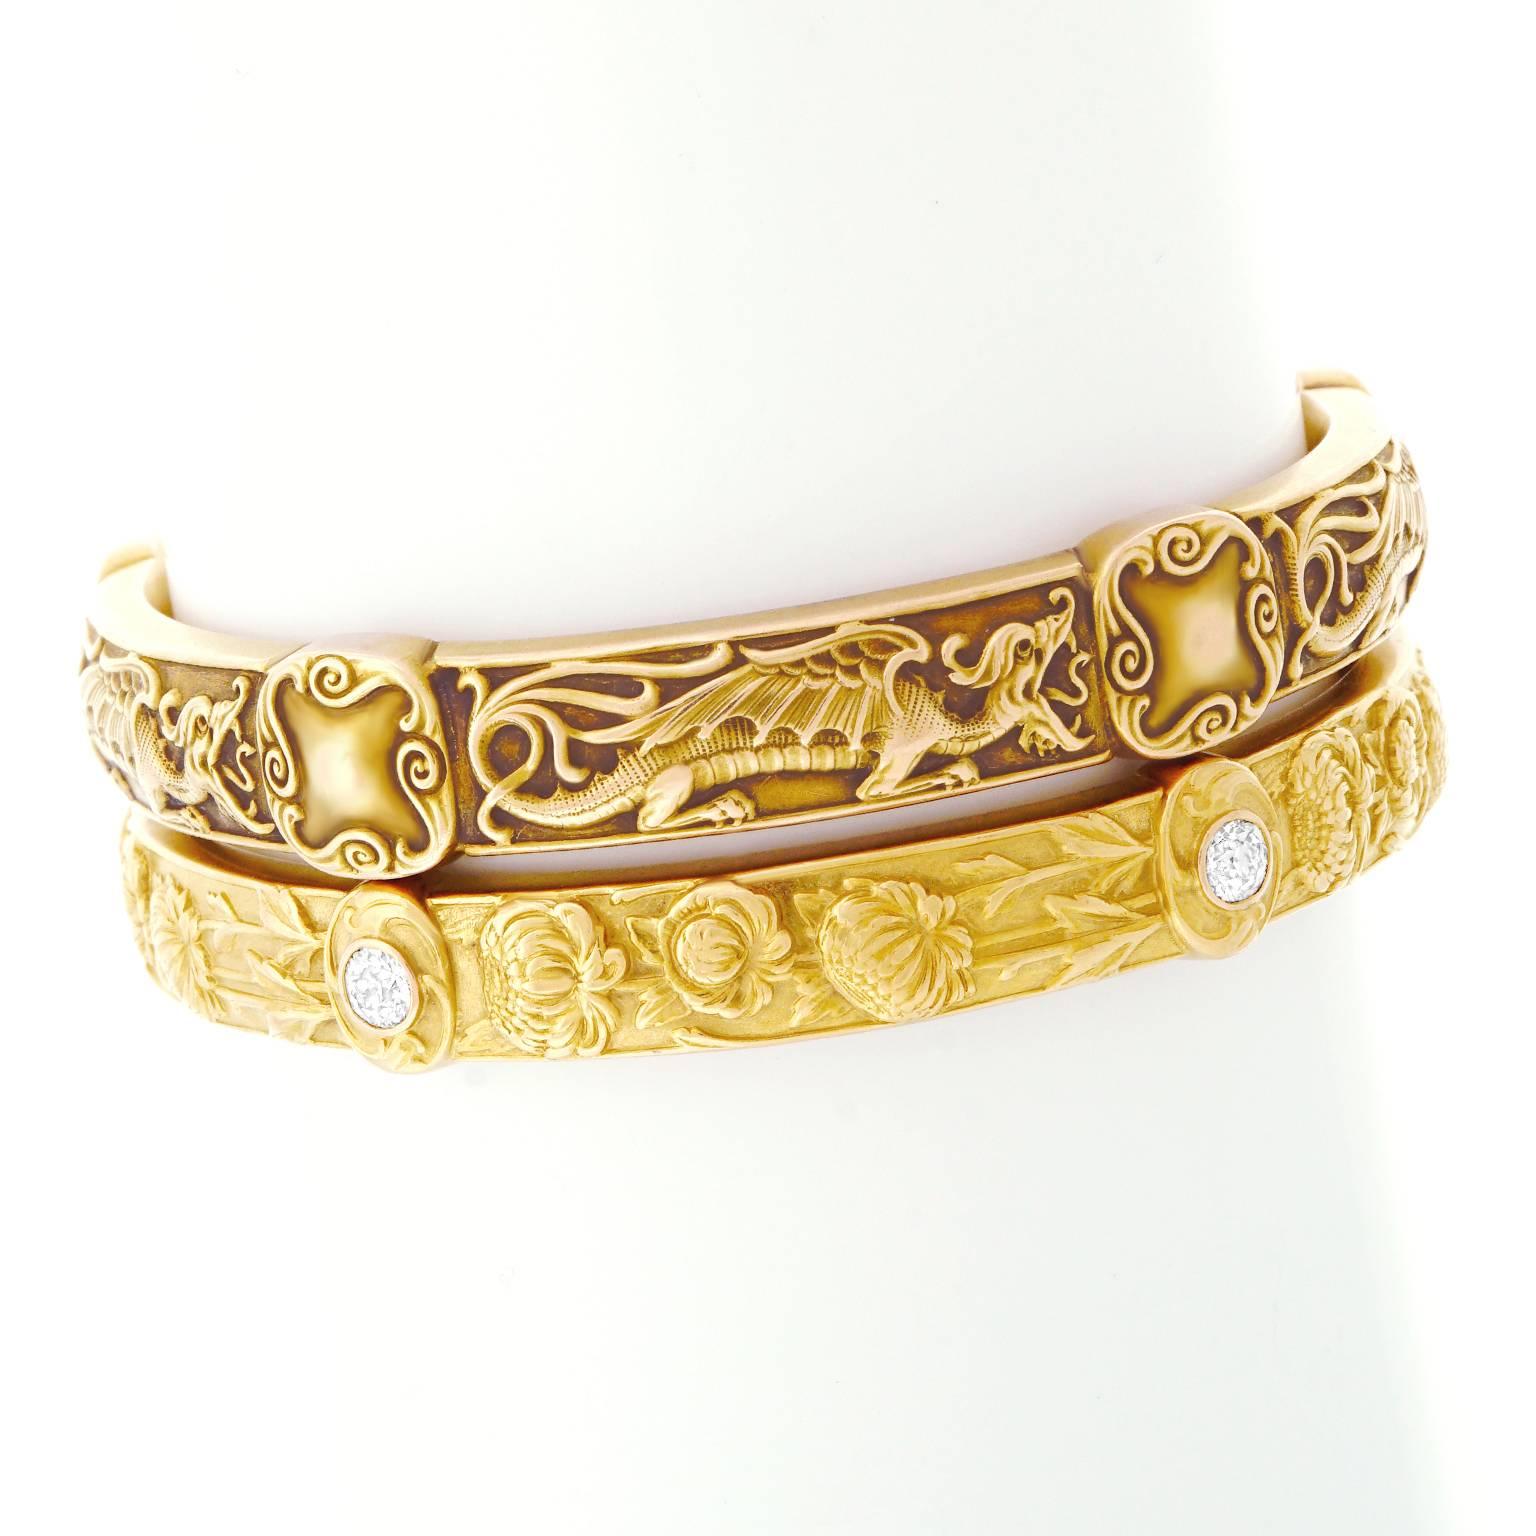 Riker Brothers Art Nouveau Pair of Gold Bangles For Sale 1